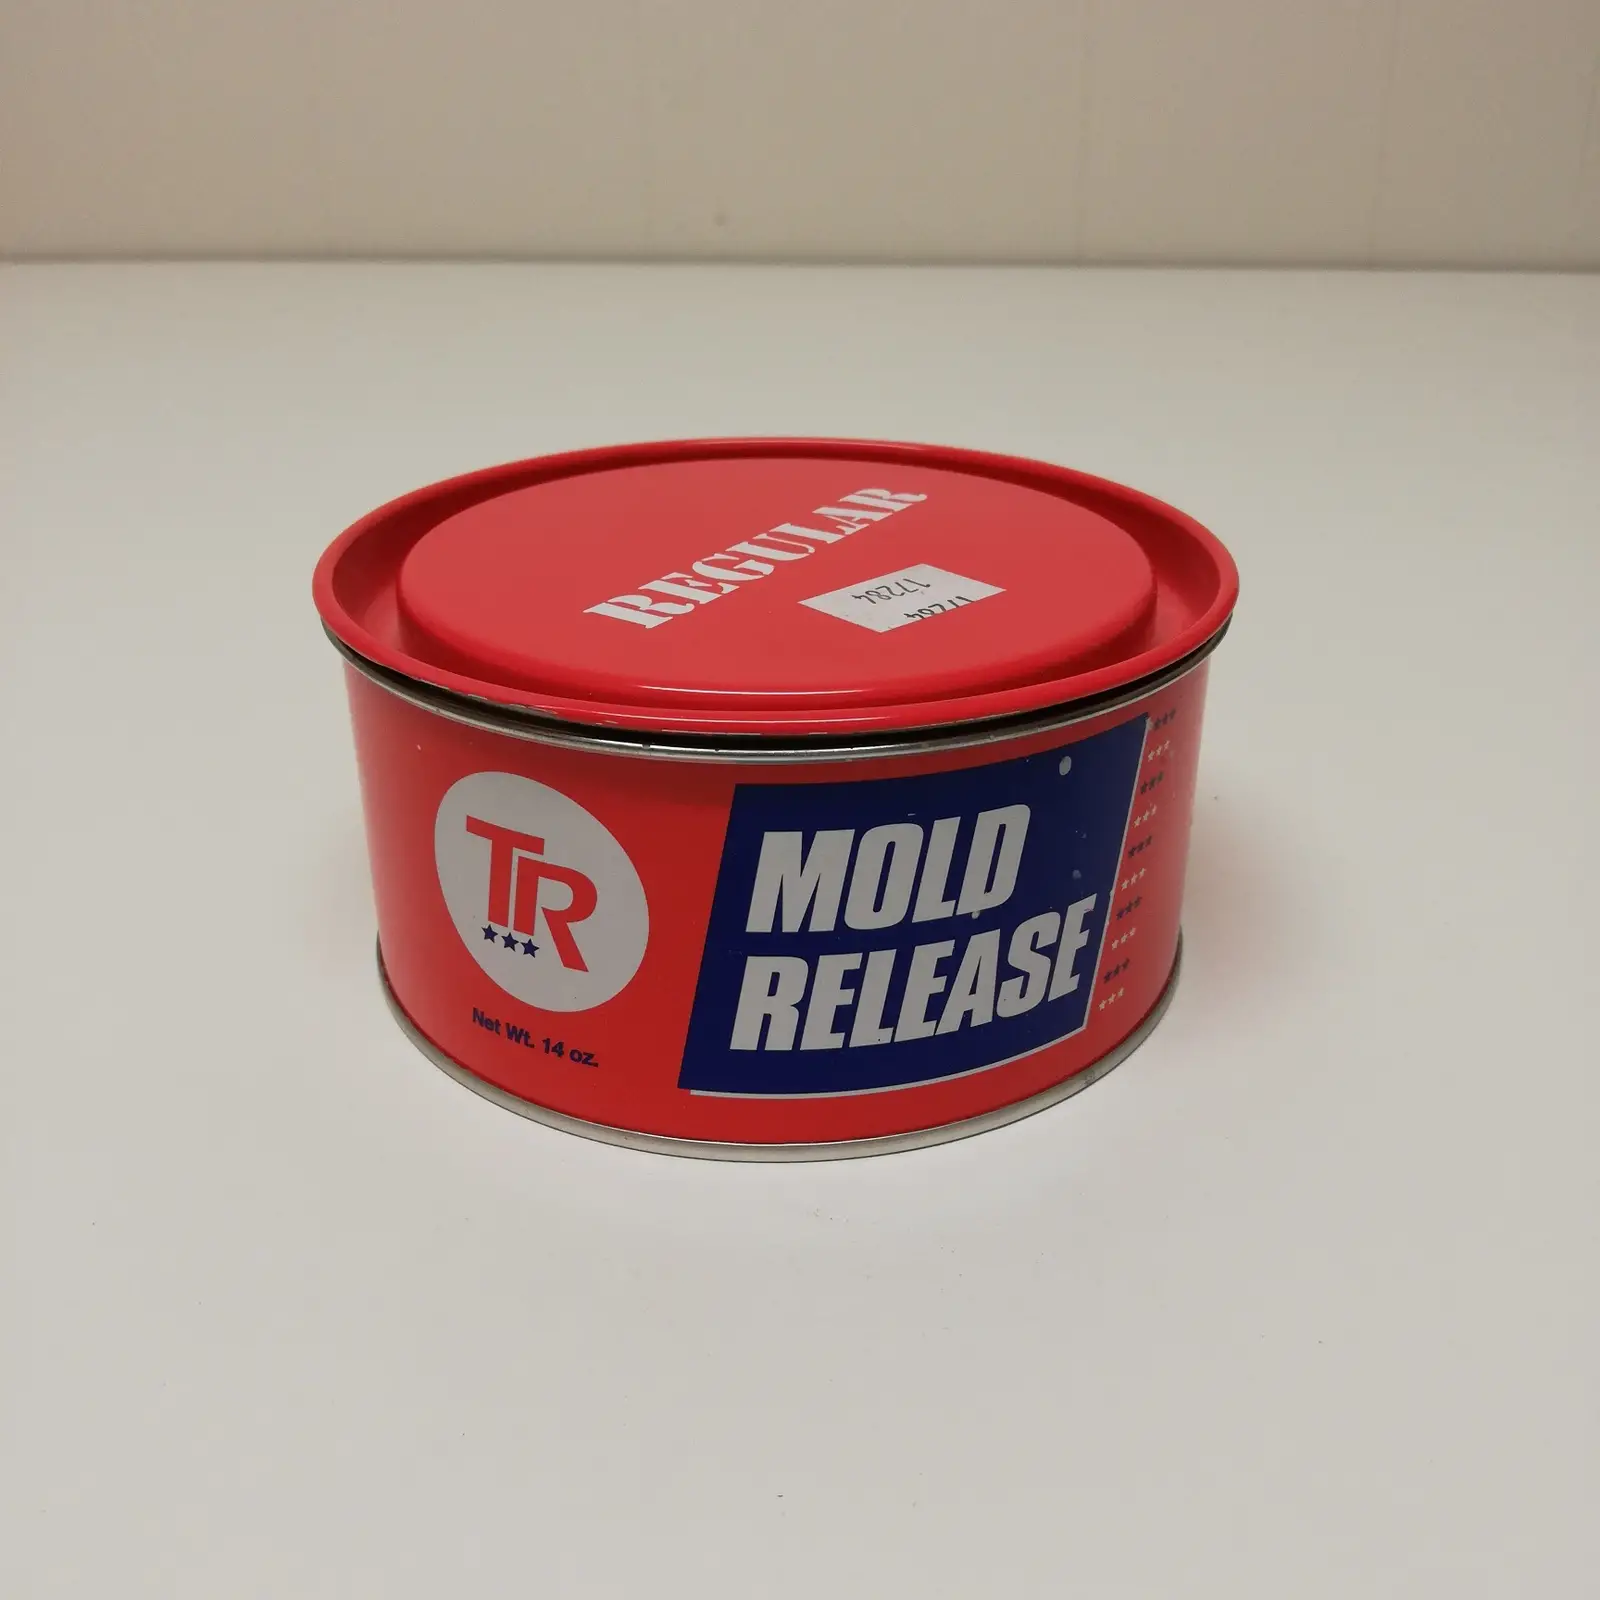 TR Mold Release